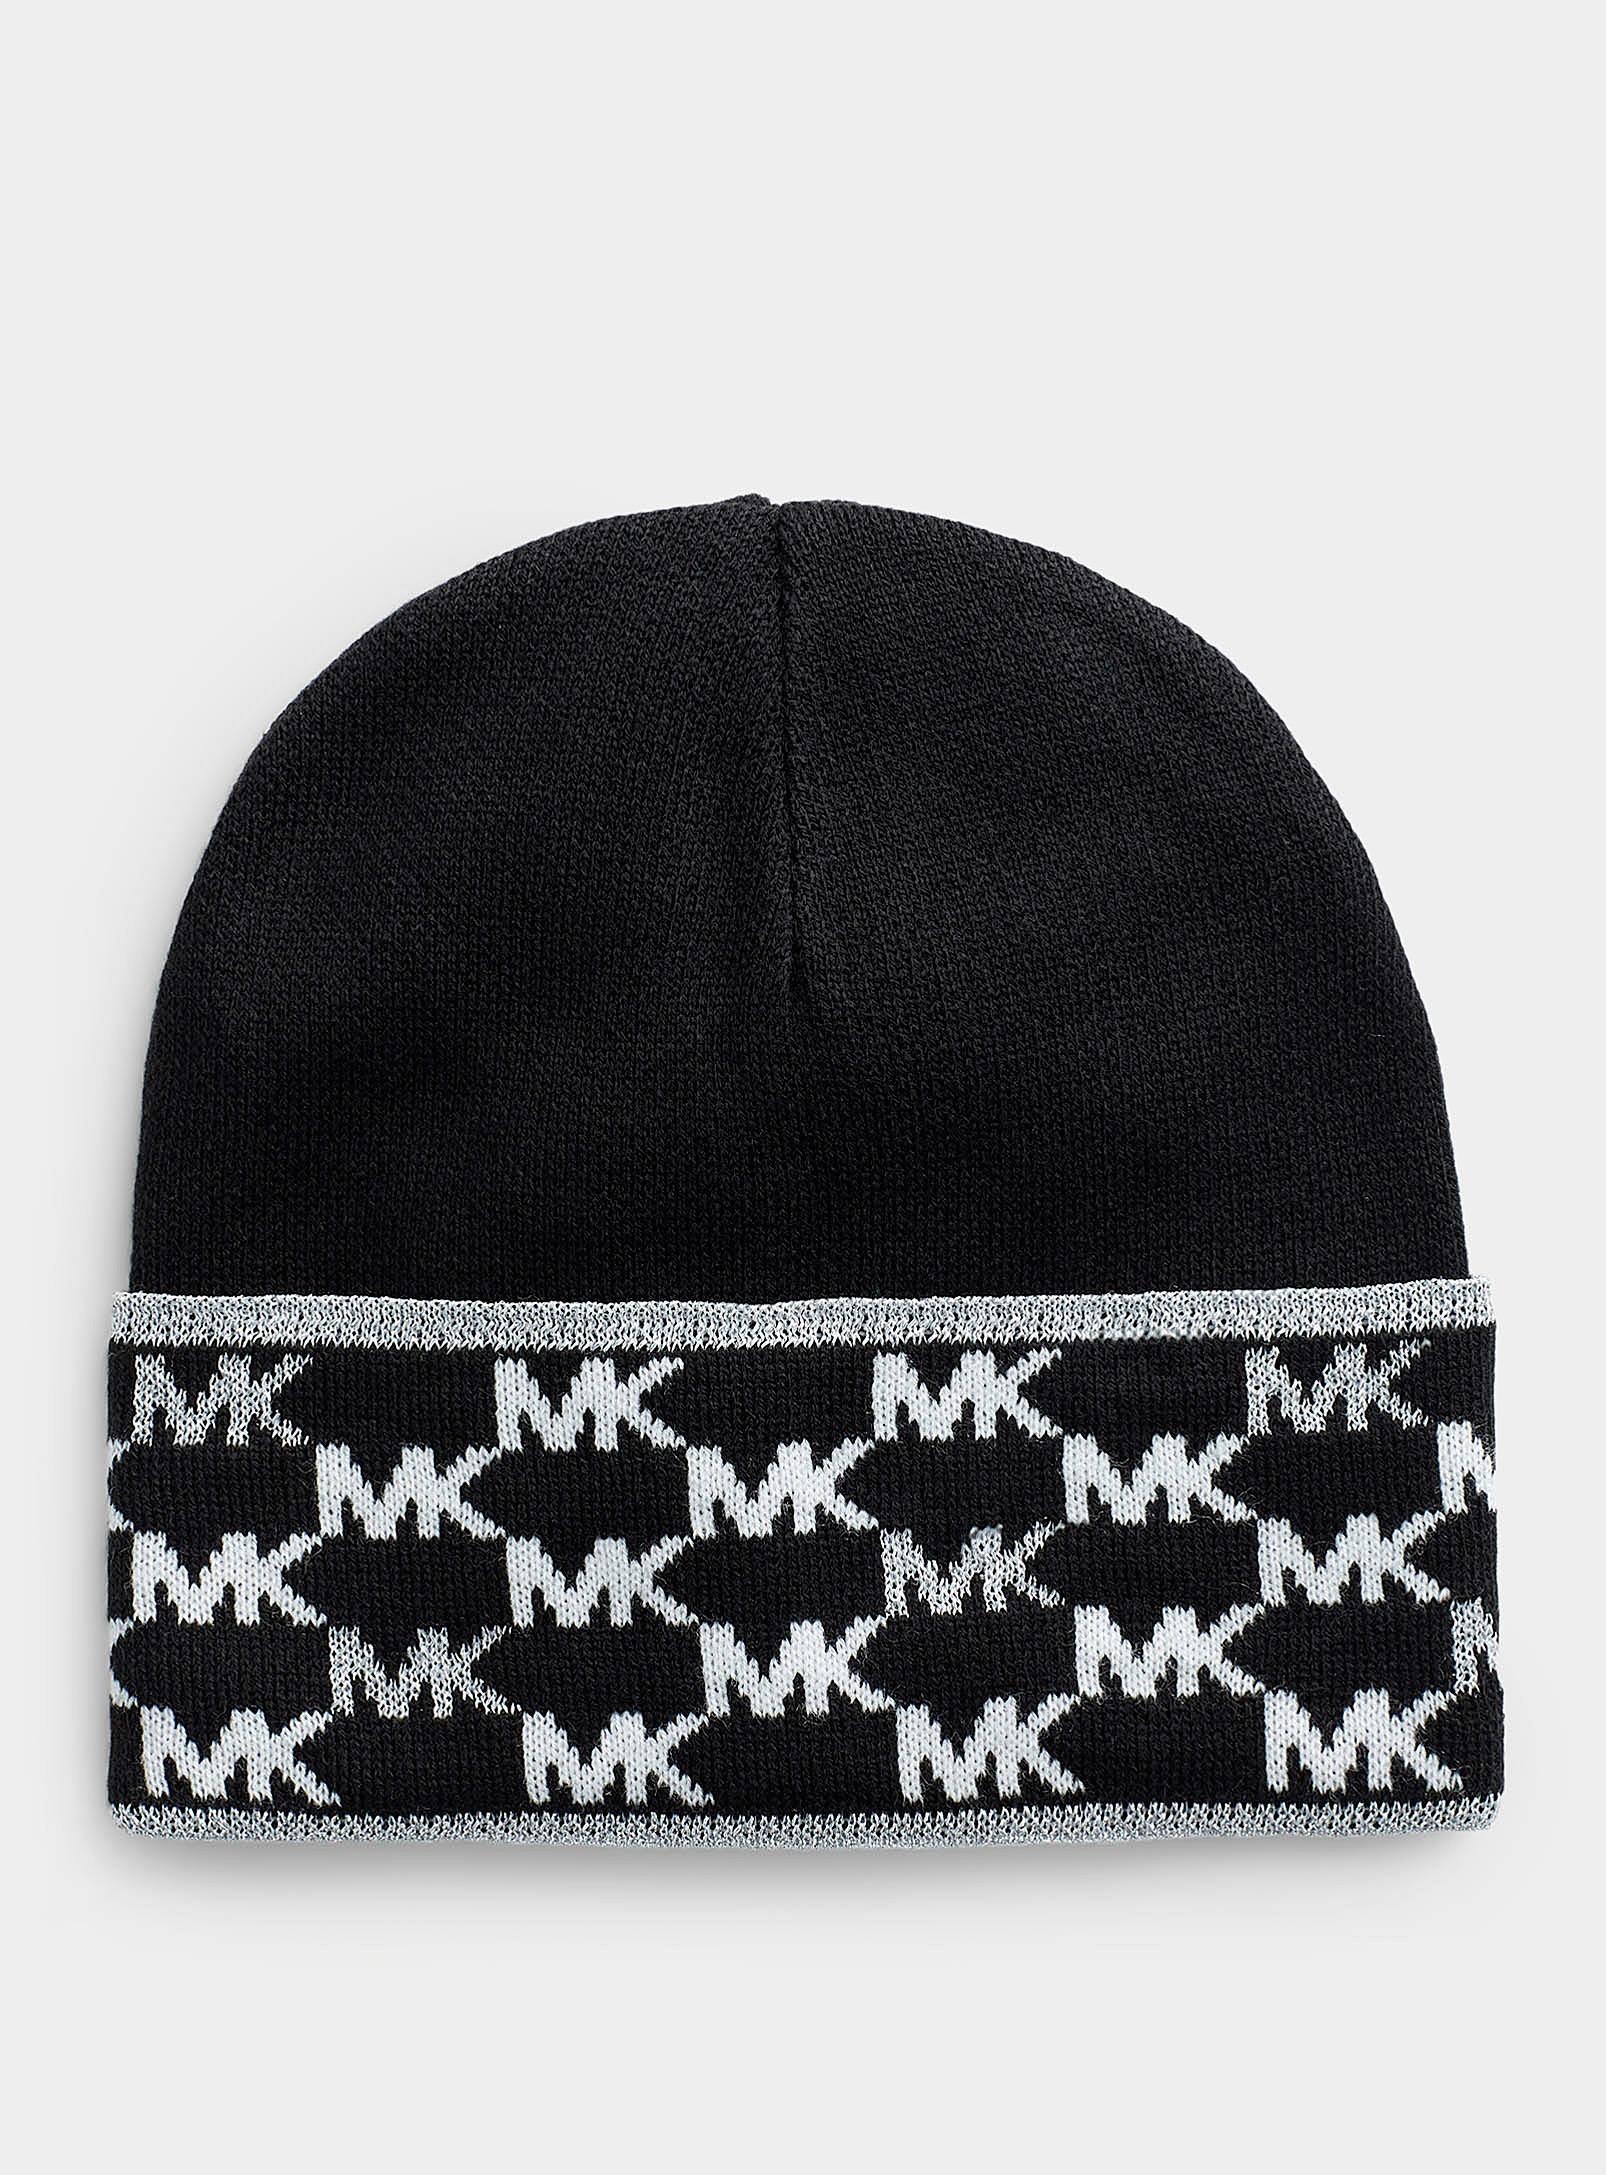 MICHAEL Michael Kors Shimmery Monogram Cuffed Tuque in Black | Lyst